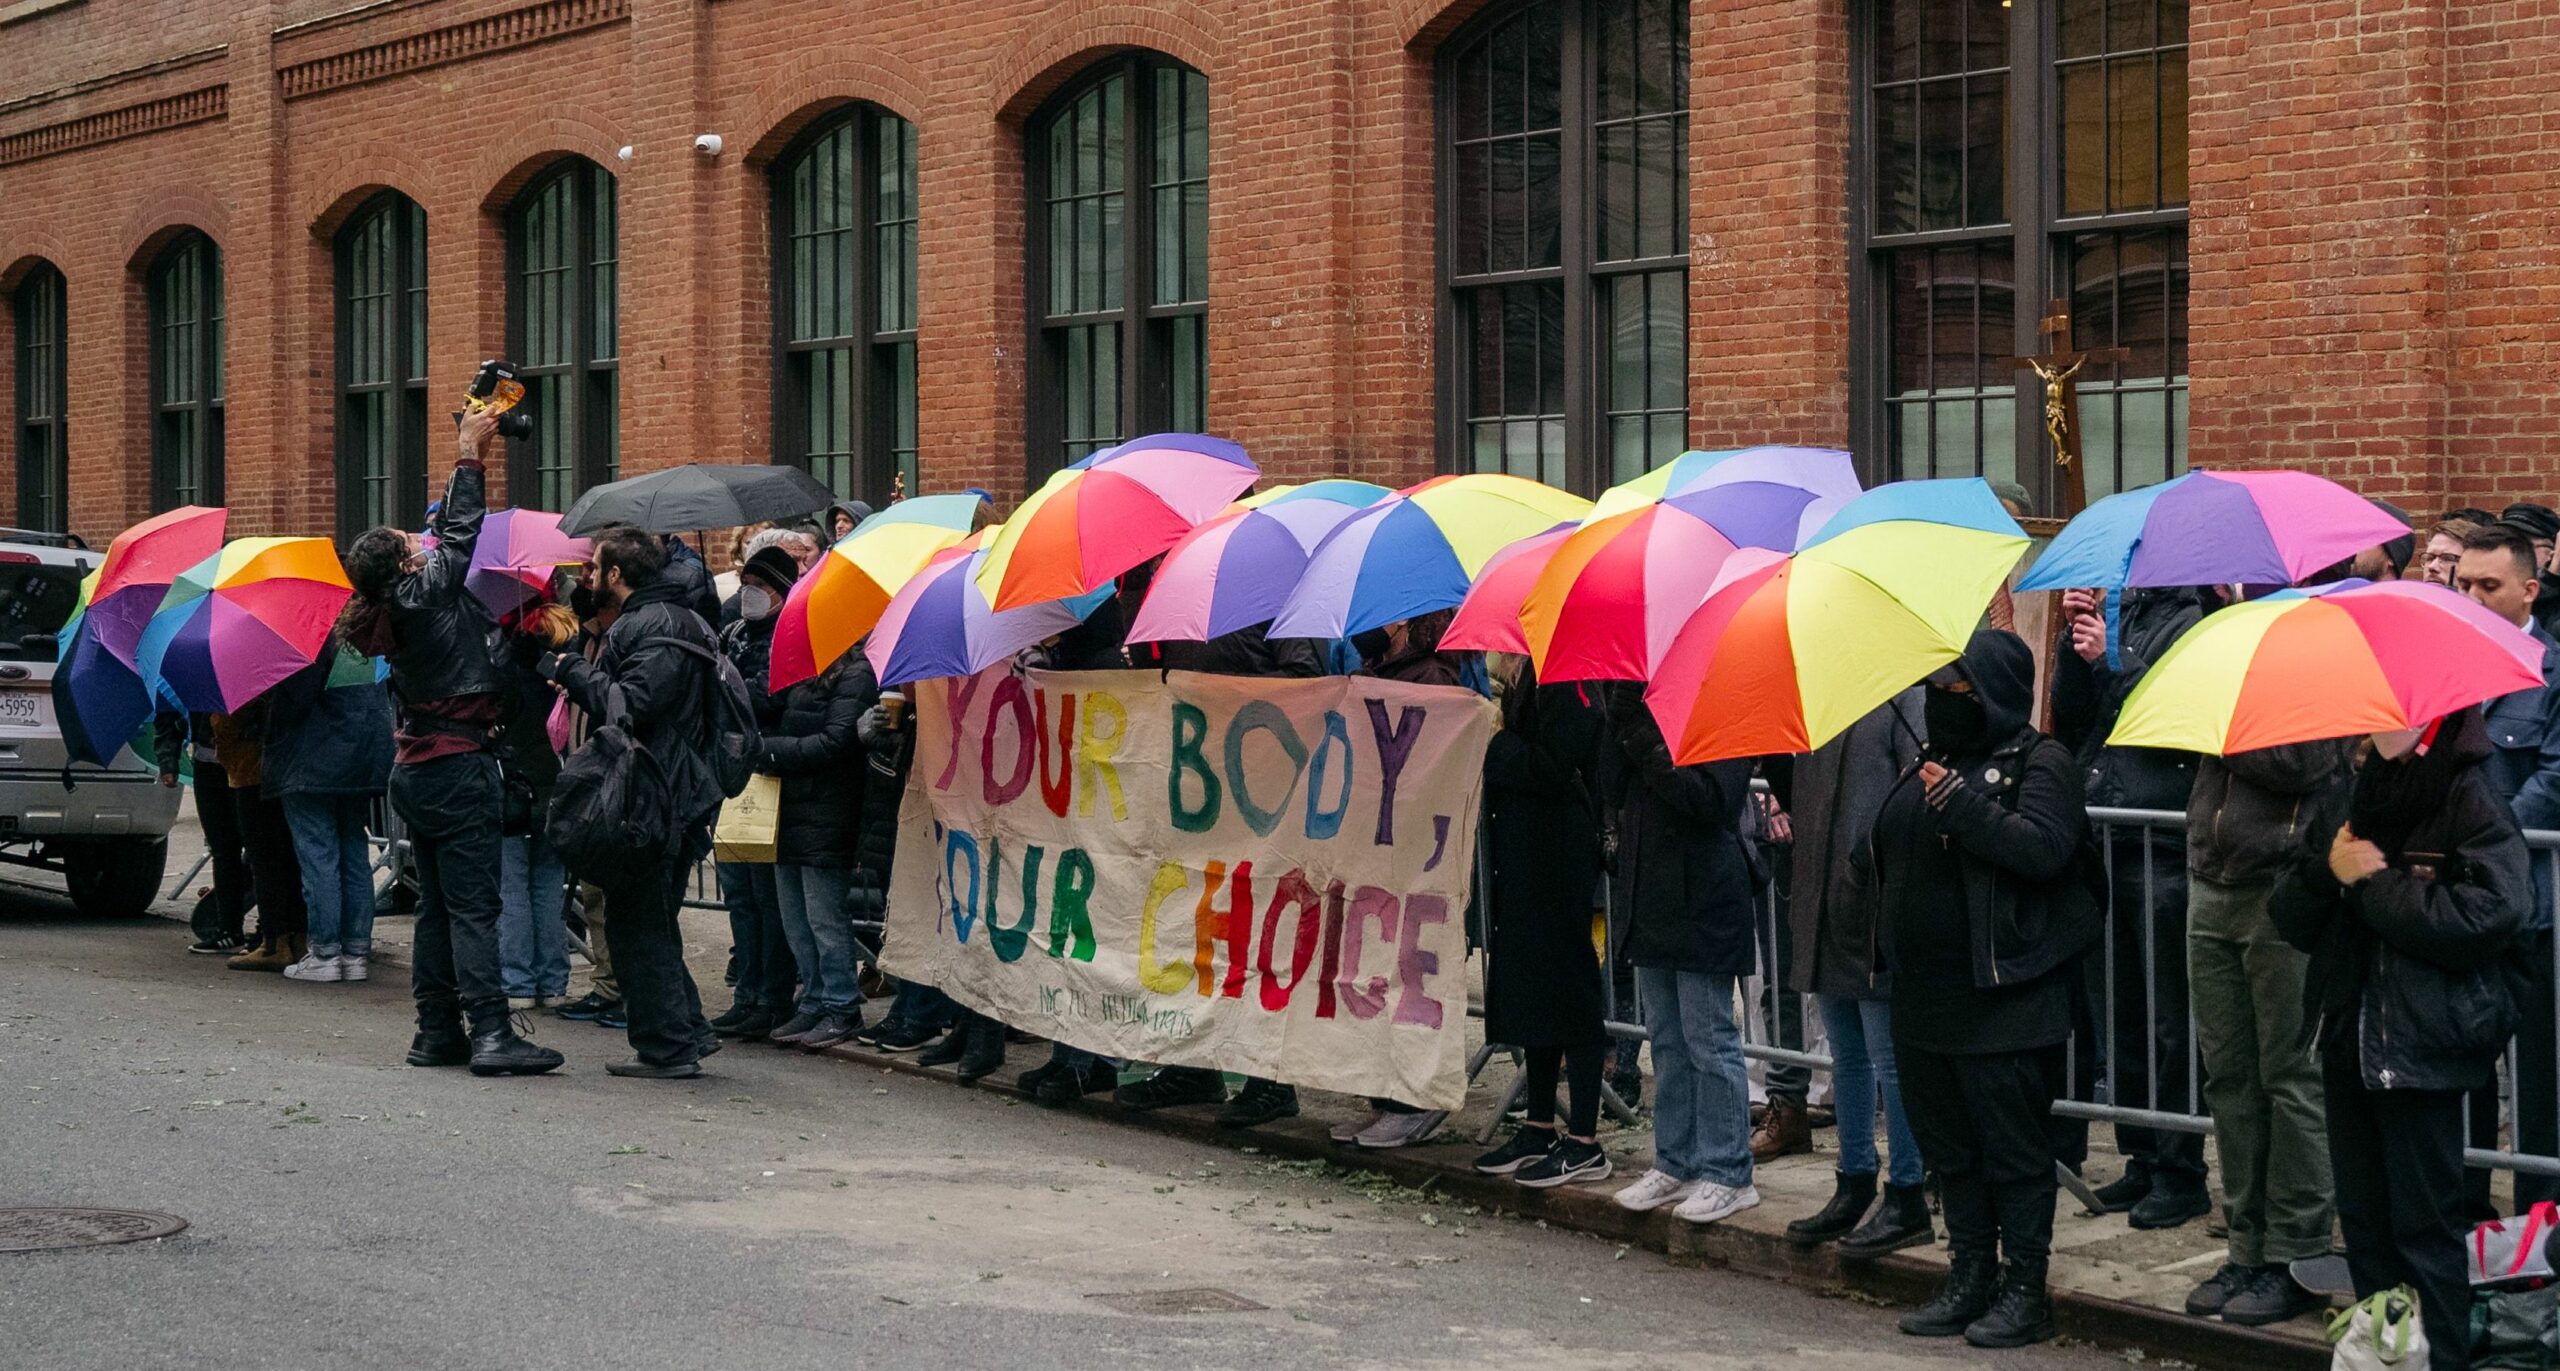 Clinic defenders block anti-abortion harassers with rainbow umbrellas and a big banner that reads "Your Body Your Choice"